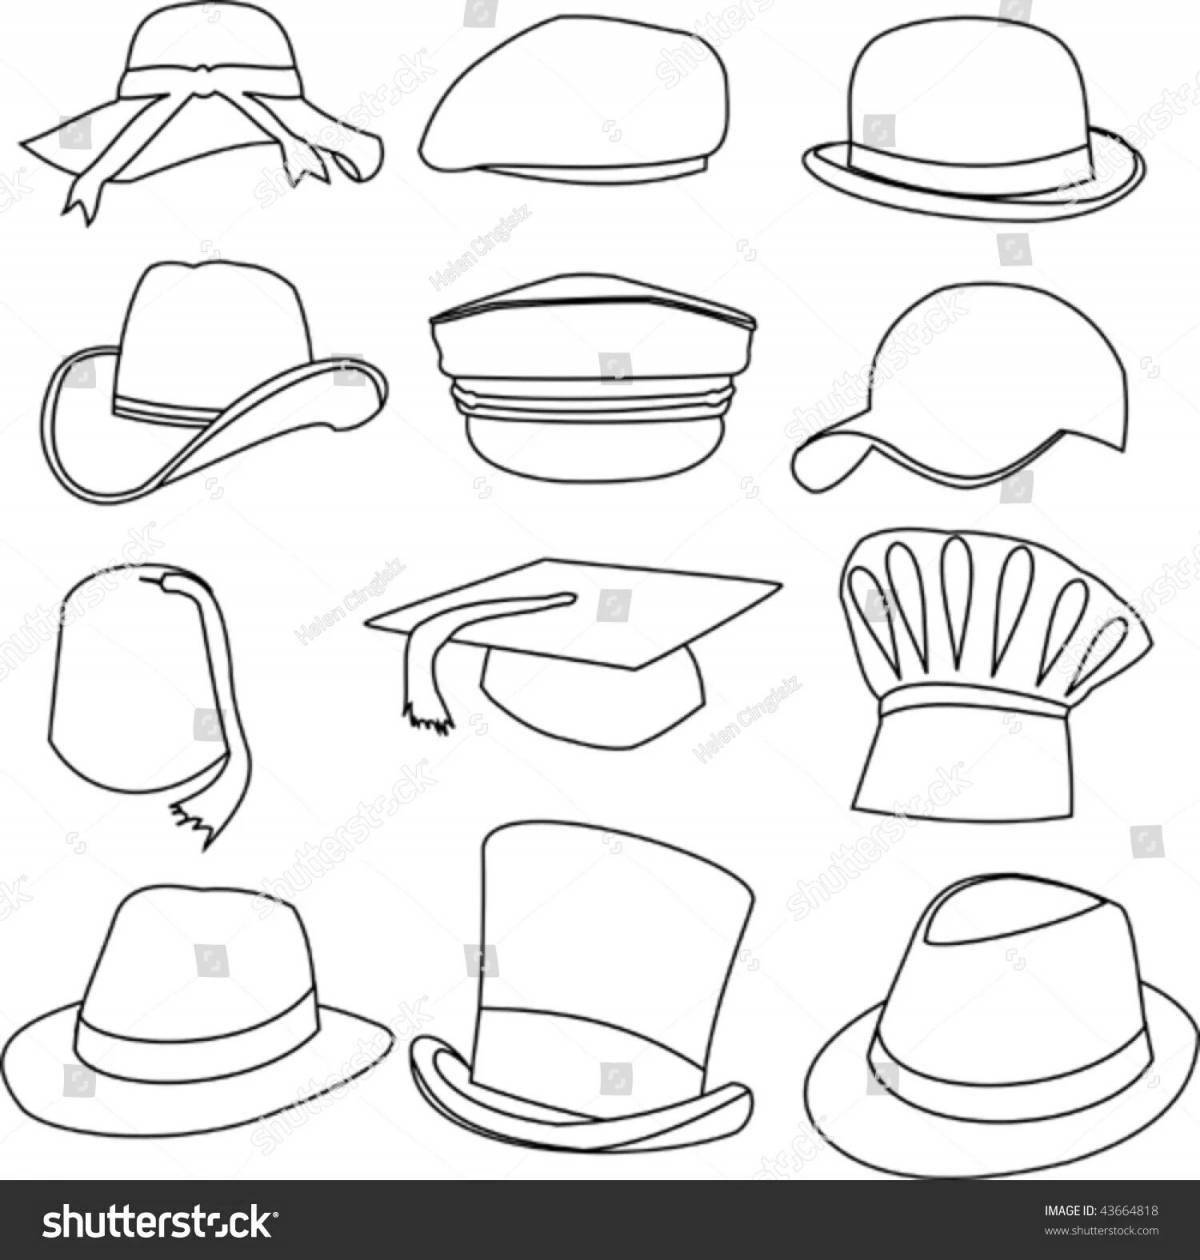 Coloring page adorable hat for children 4-5 years old